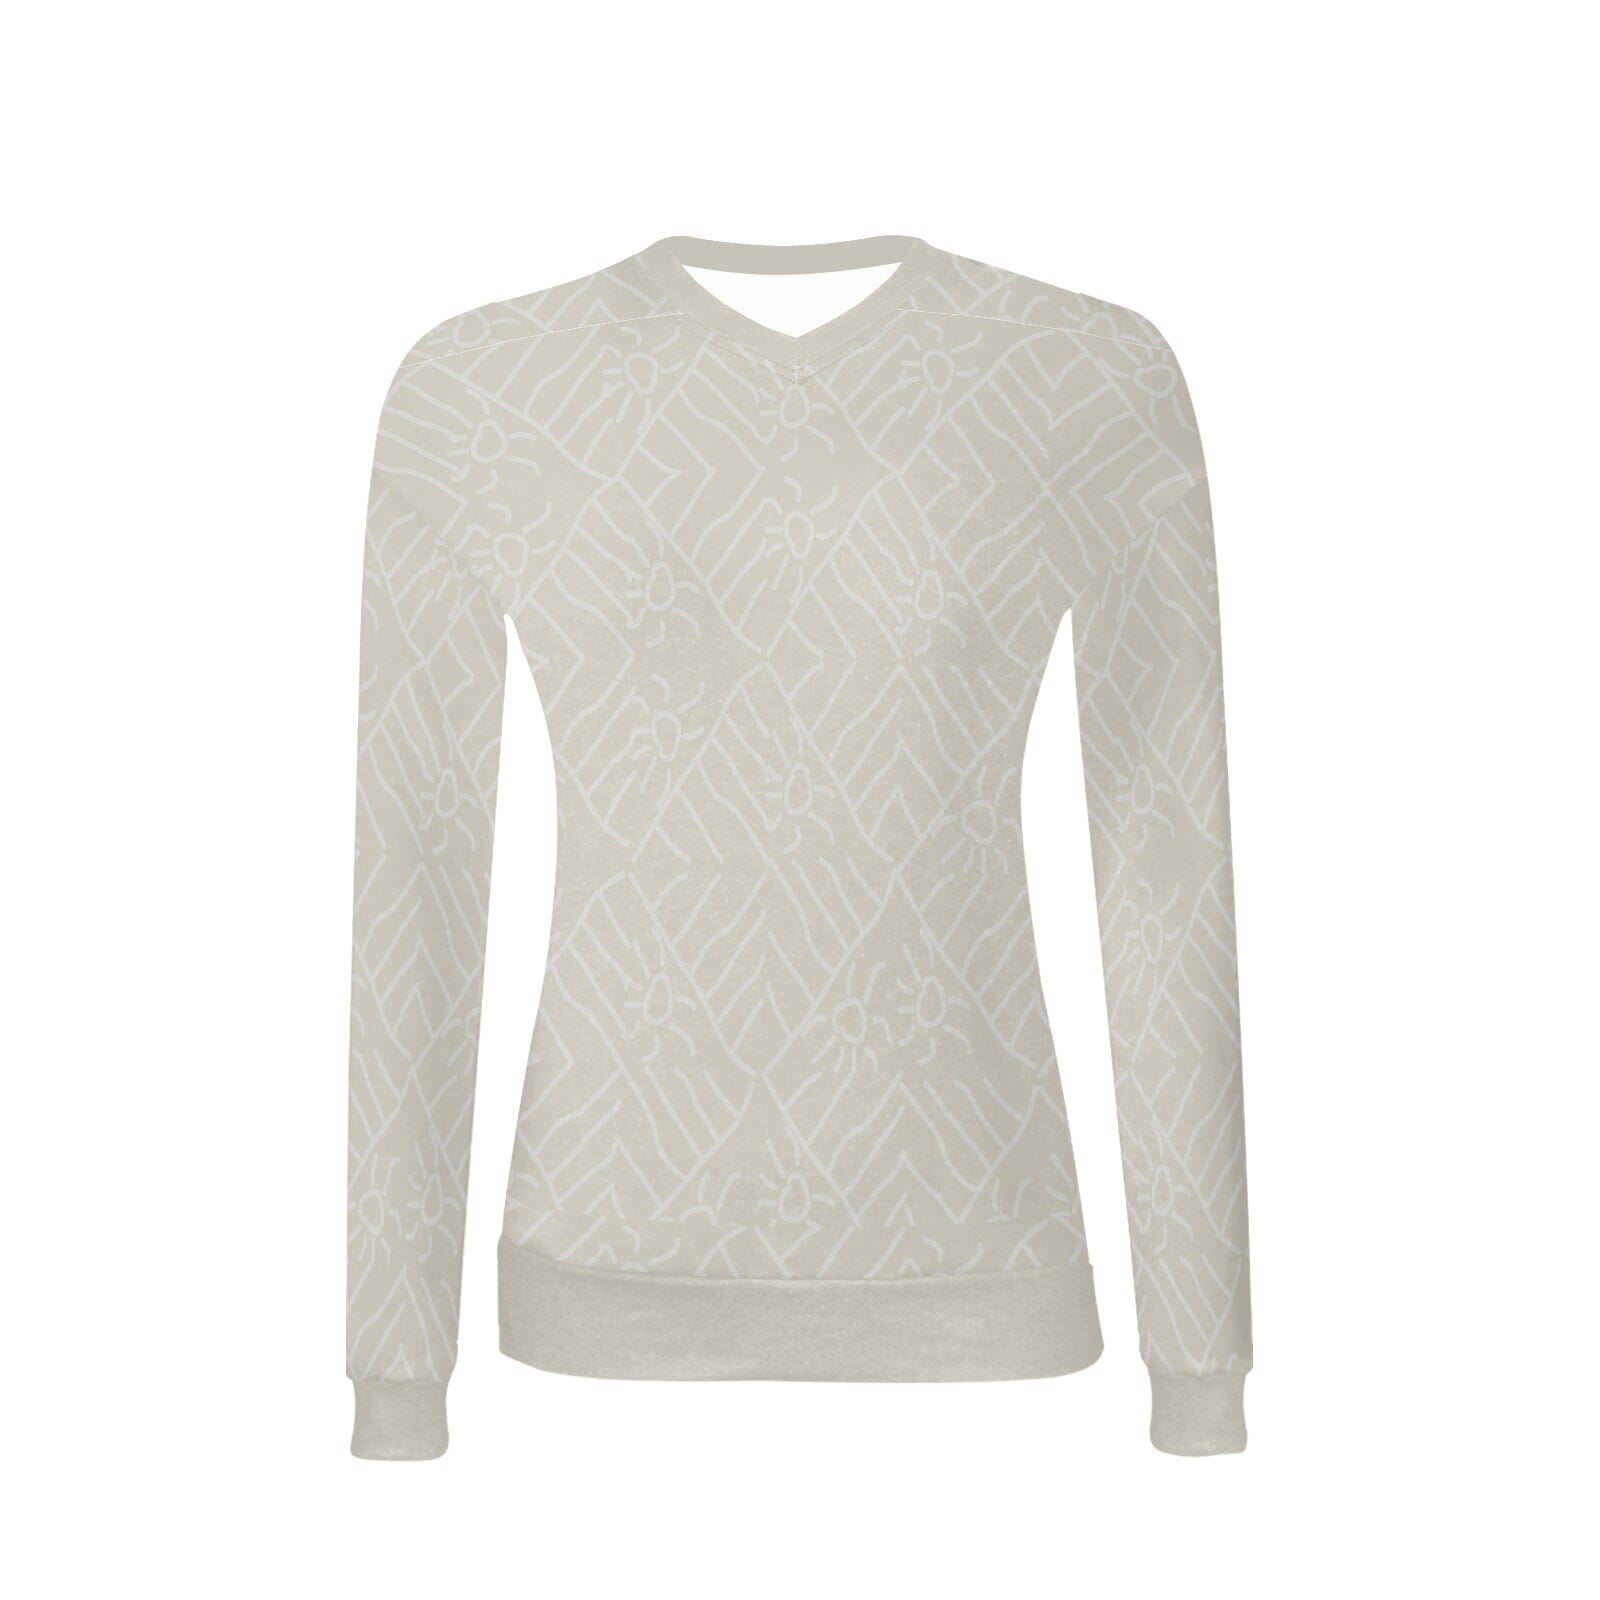 African print sweater v neck ivory